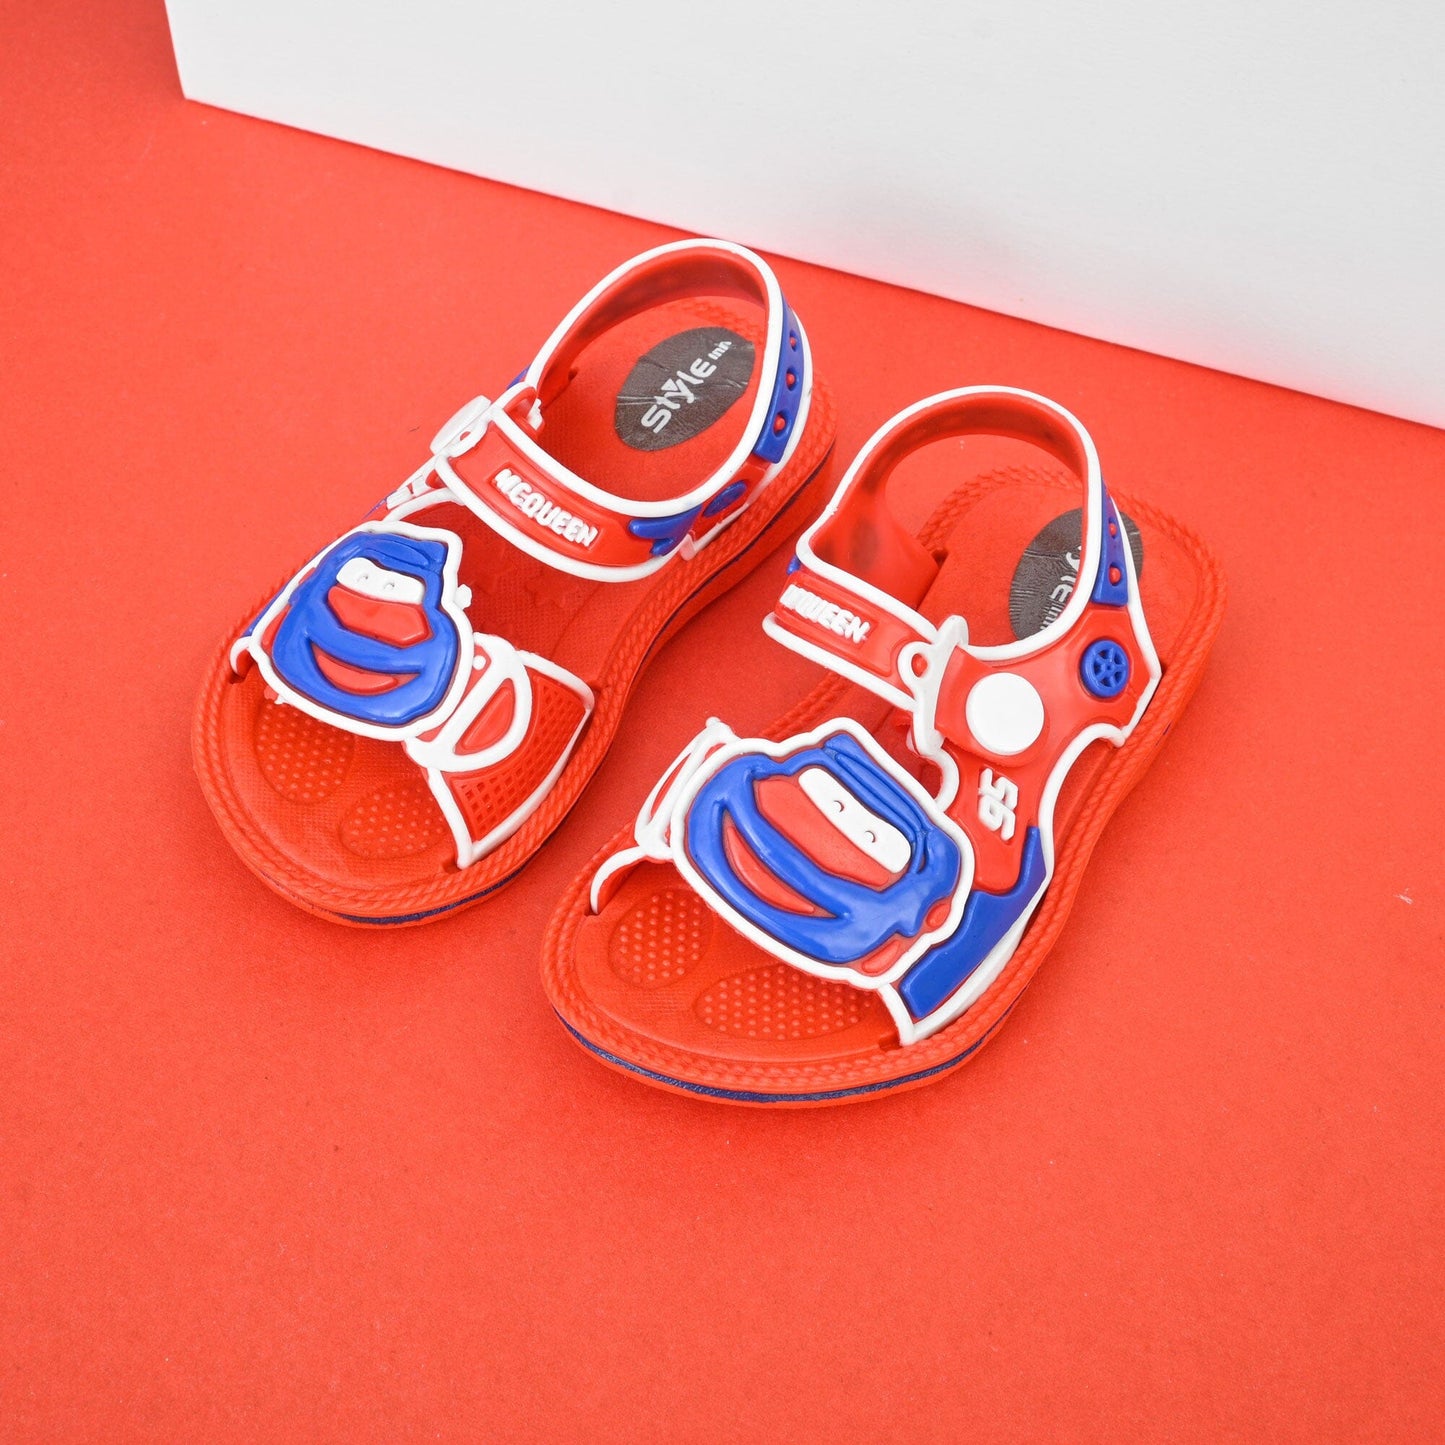 Kid's McQueen Car Themed Sandals Girl's Shoes RAM Red EUR 18 